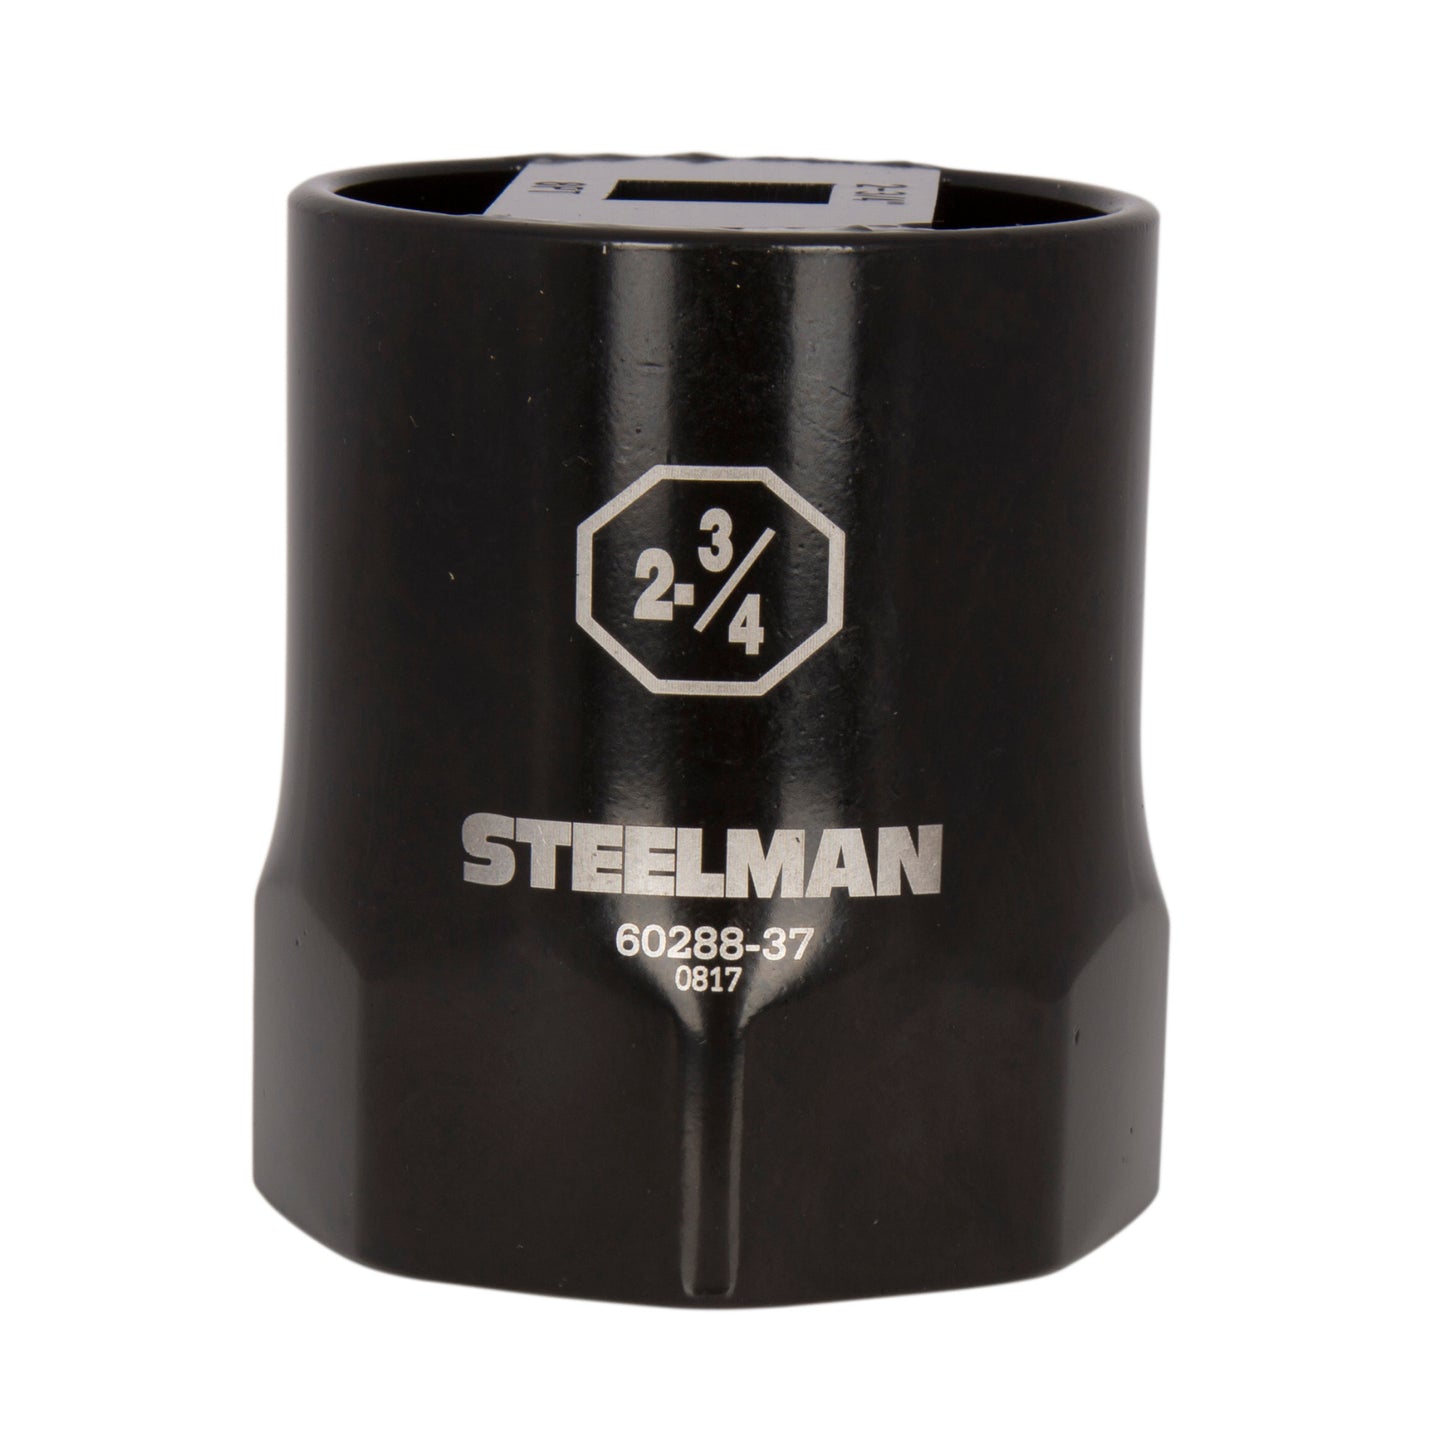 The STEELMAN 2-3/4-inch 8-Point Locknut Socket is designed in a 8-point style that grips the sides of fasteners instead of the corners to reduce wear and rounding. Carbon steel with industrial-strength black powder coat and laser etched callouts.